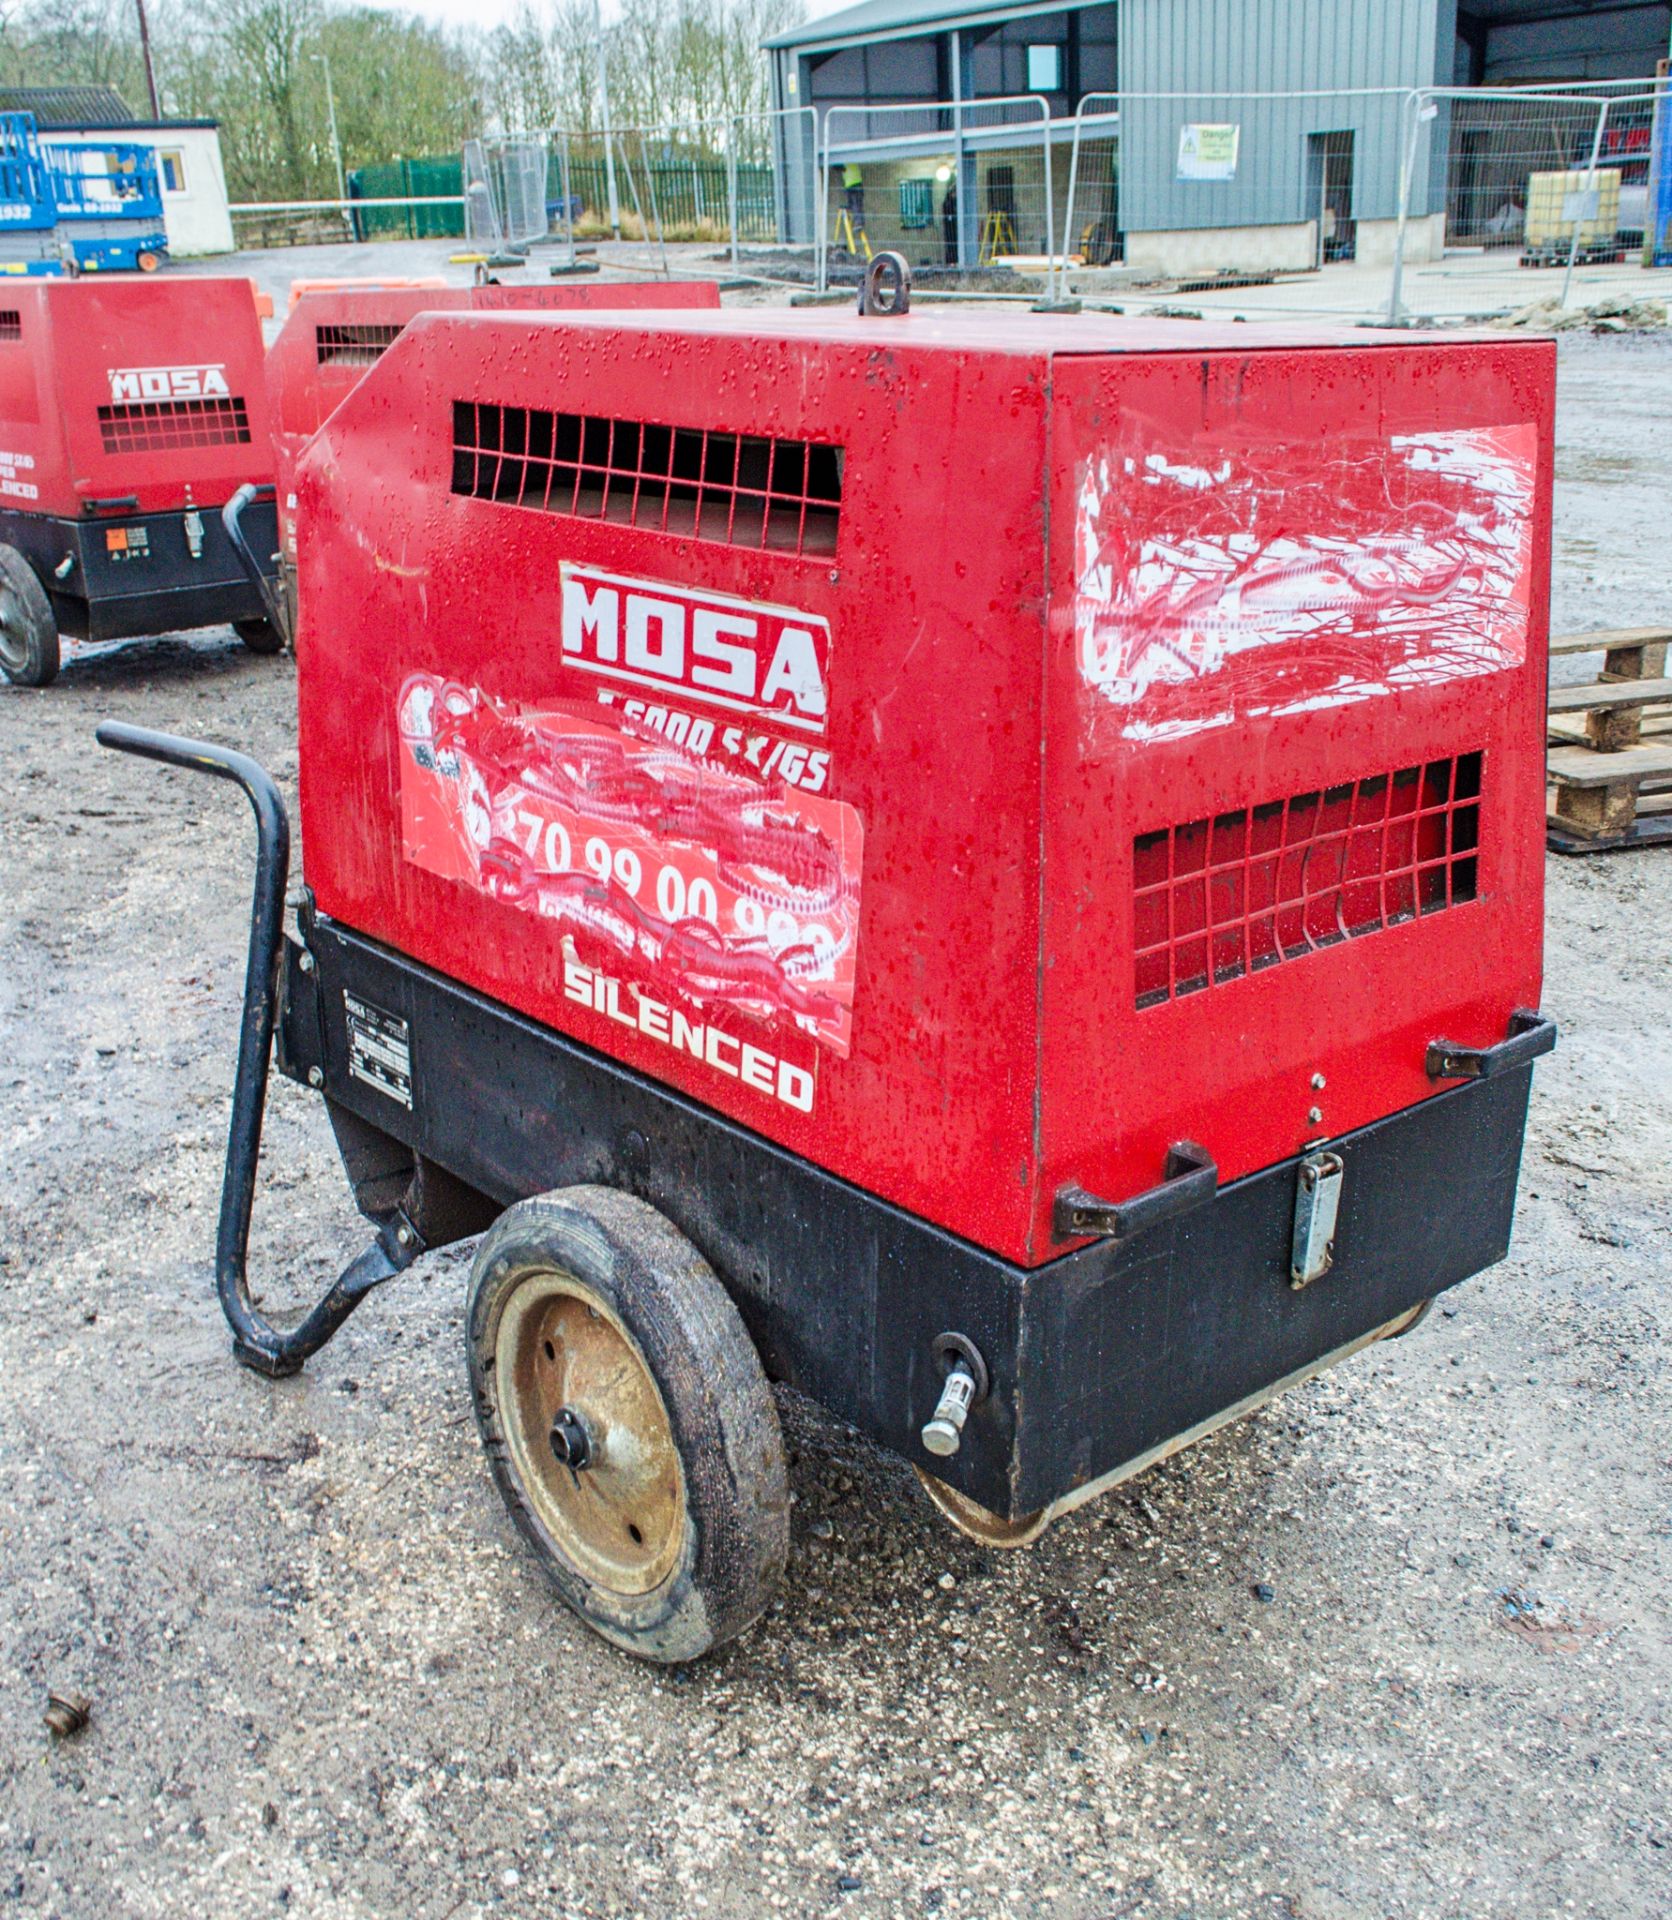 Mosa GE6000 SX/GS 6 kva diesel driven generator Year: 2014 S/N: 33056 Recorded Hours: 455 1404-3911 - Image 2 of 4